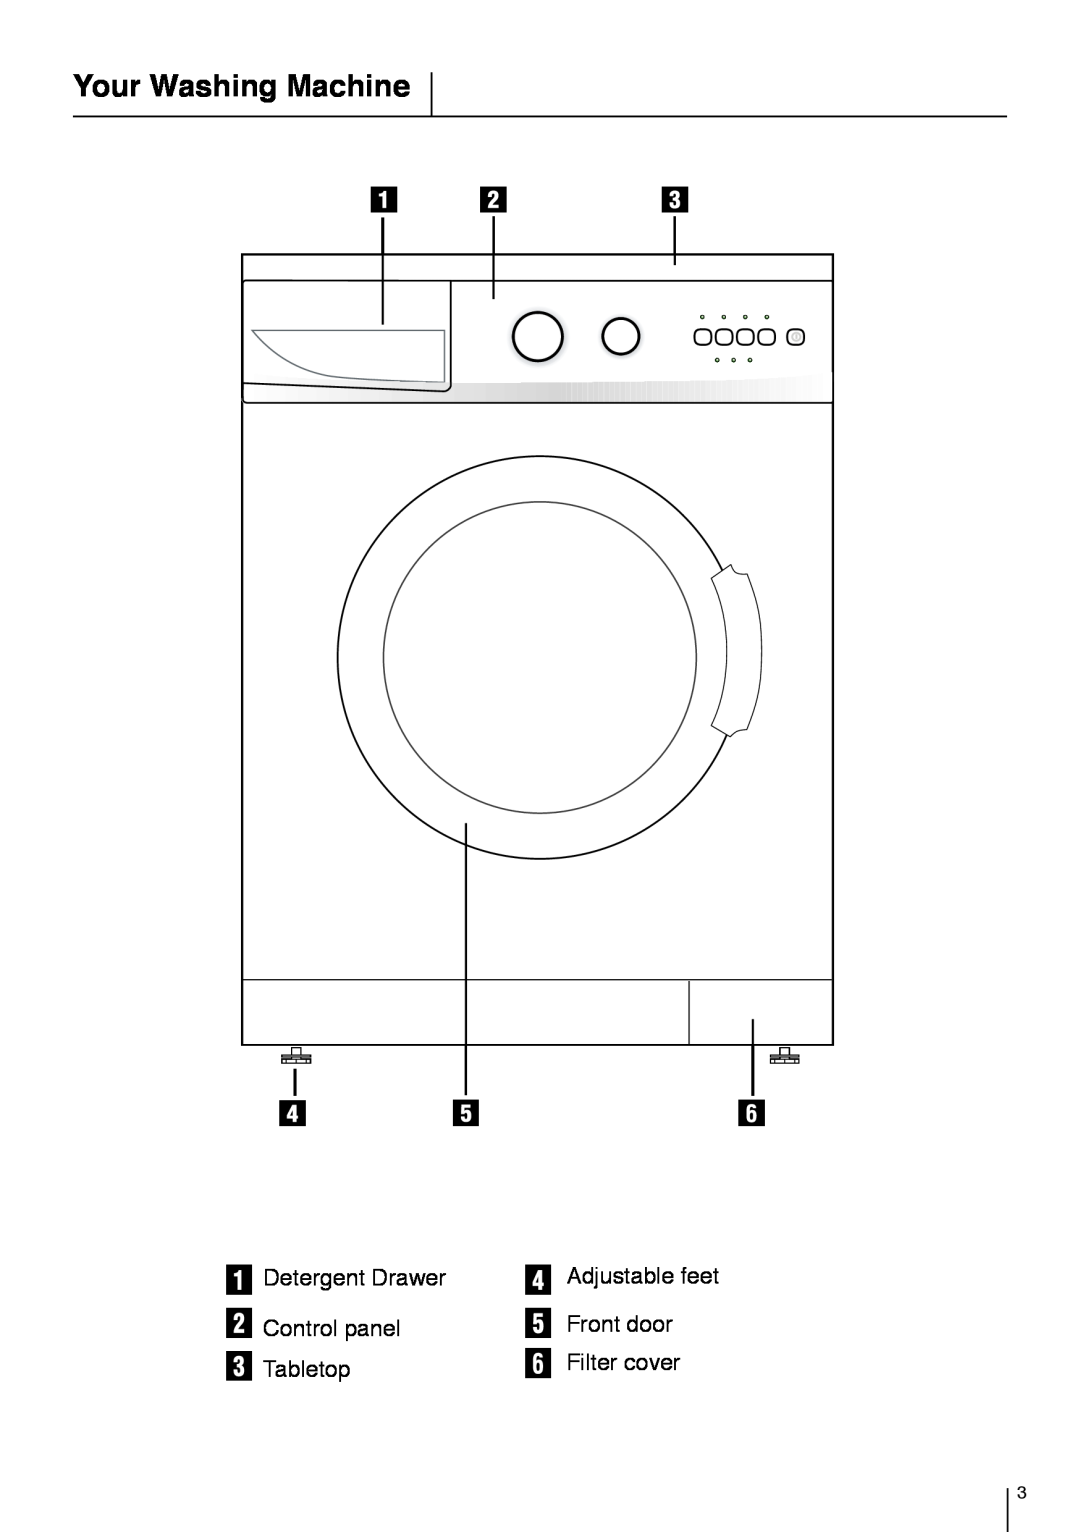 Smeg LBS 845 manual Your Washing Machine, Detergent Drawer, Control panel, Front door, Tabletop, Filter cover 